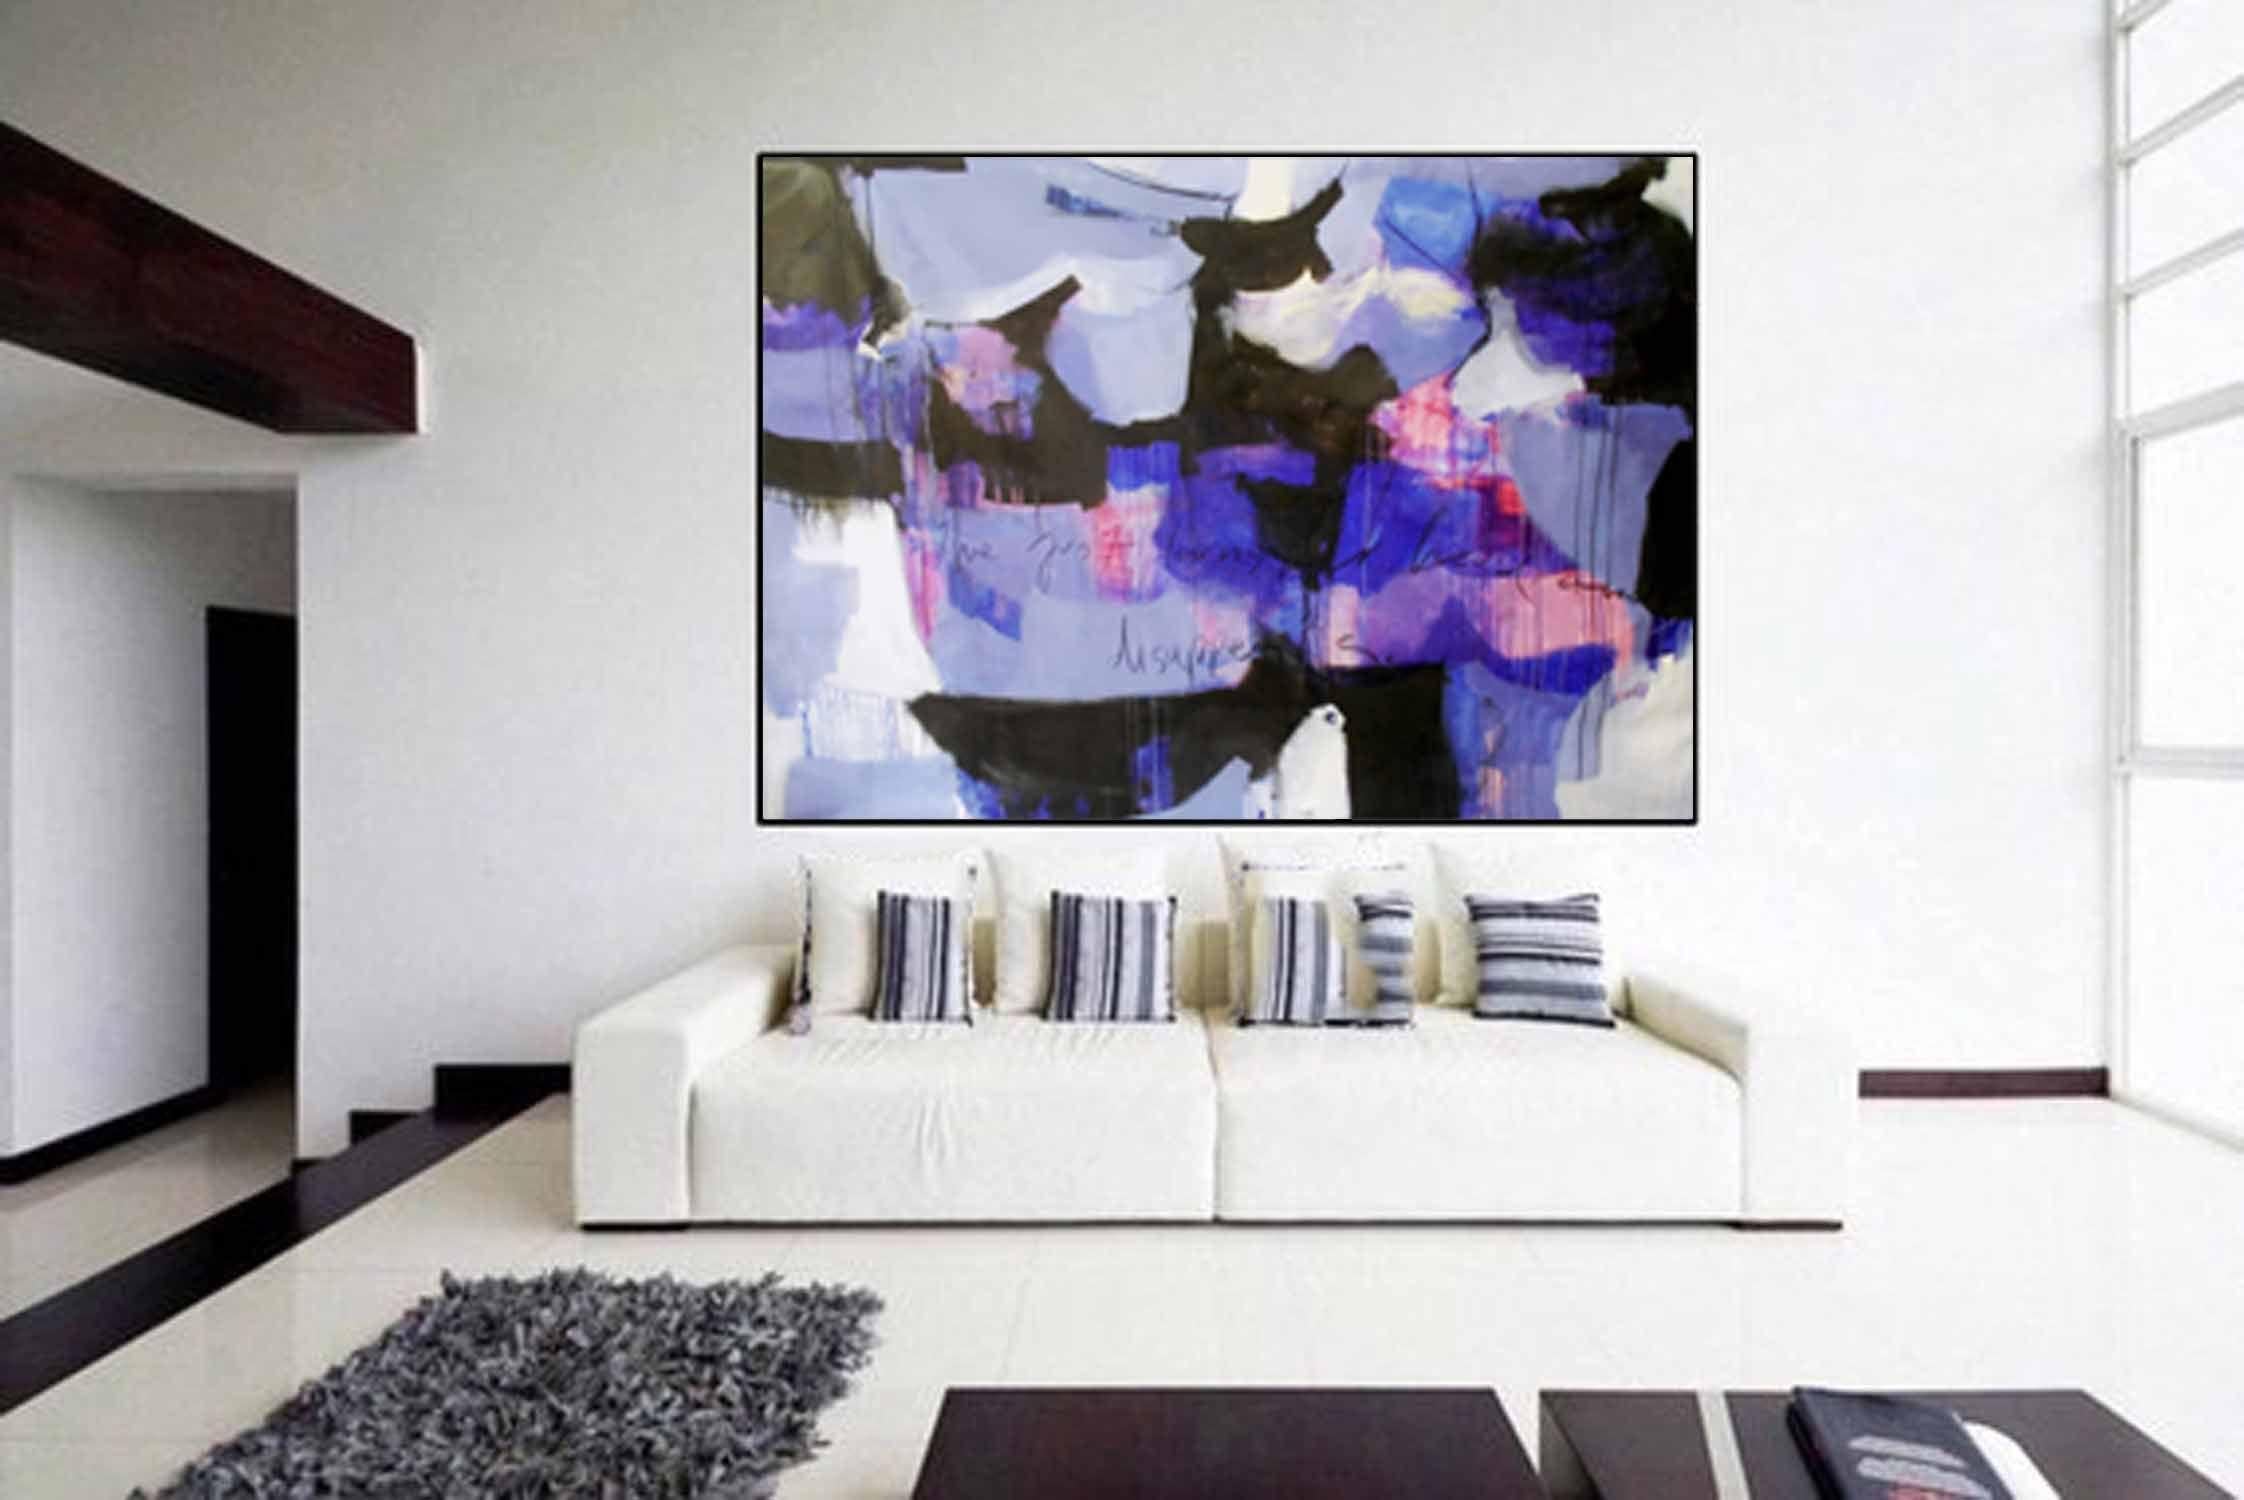 Extra large abstract acrylic painting on canvas. Only the finest paints were used.    It's made with high quality beautiful organic pigments on stretched high quality canvas. Sides are painted so there is no need for framing.   Organic pigments tend